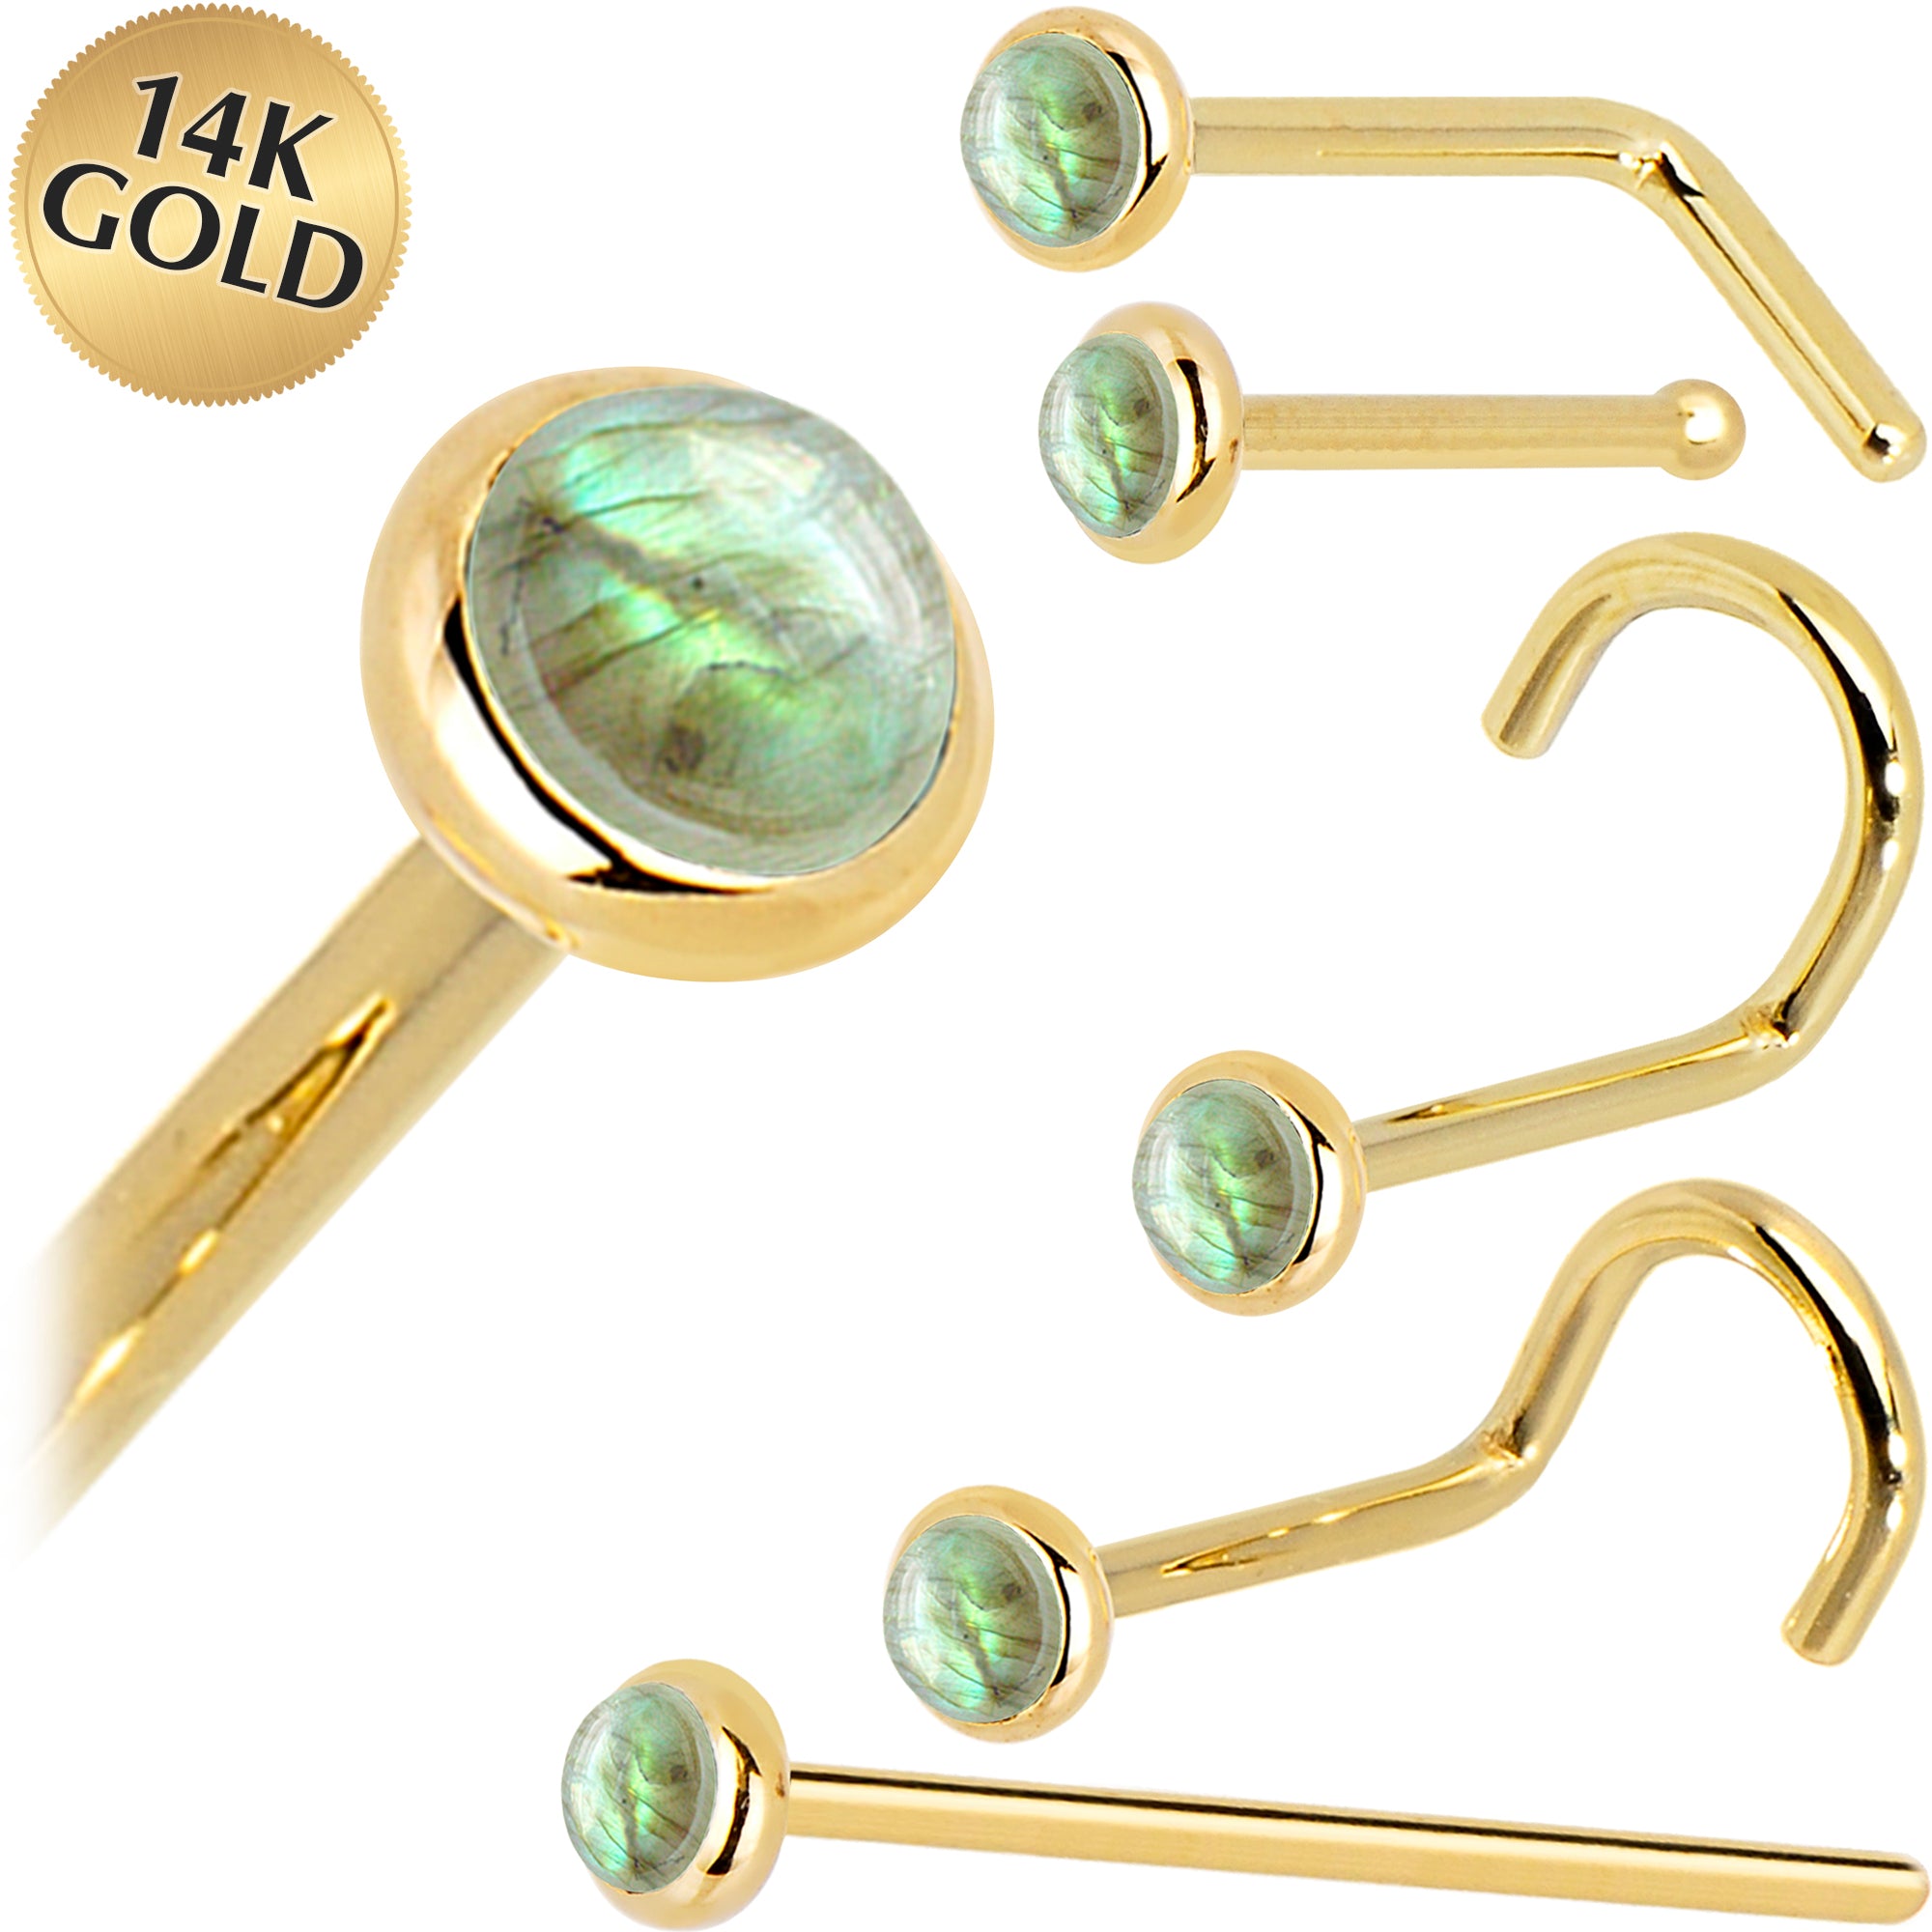 Solid 14kt Yellow Gold 2mm Labradorite Nose Ring Piercing, 18 Gauge Left Nose - 14kt Gold - Body Candy